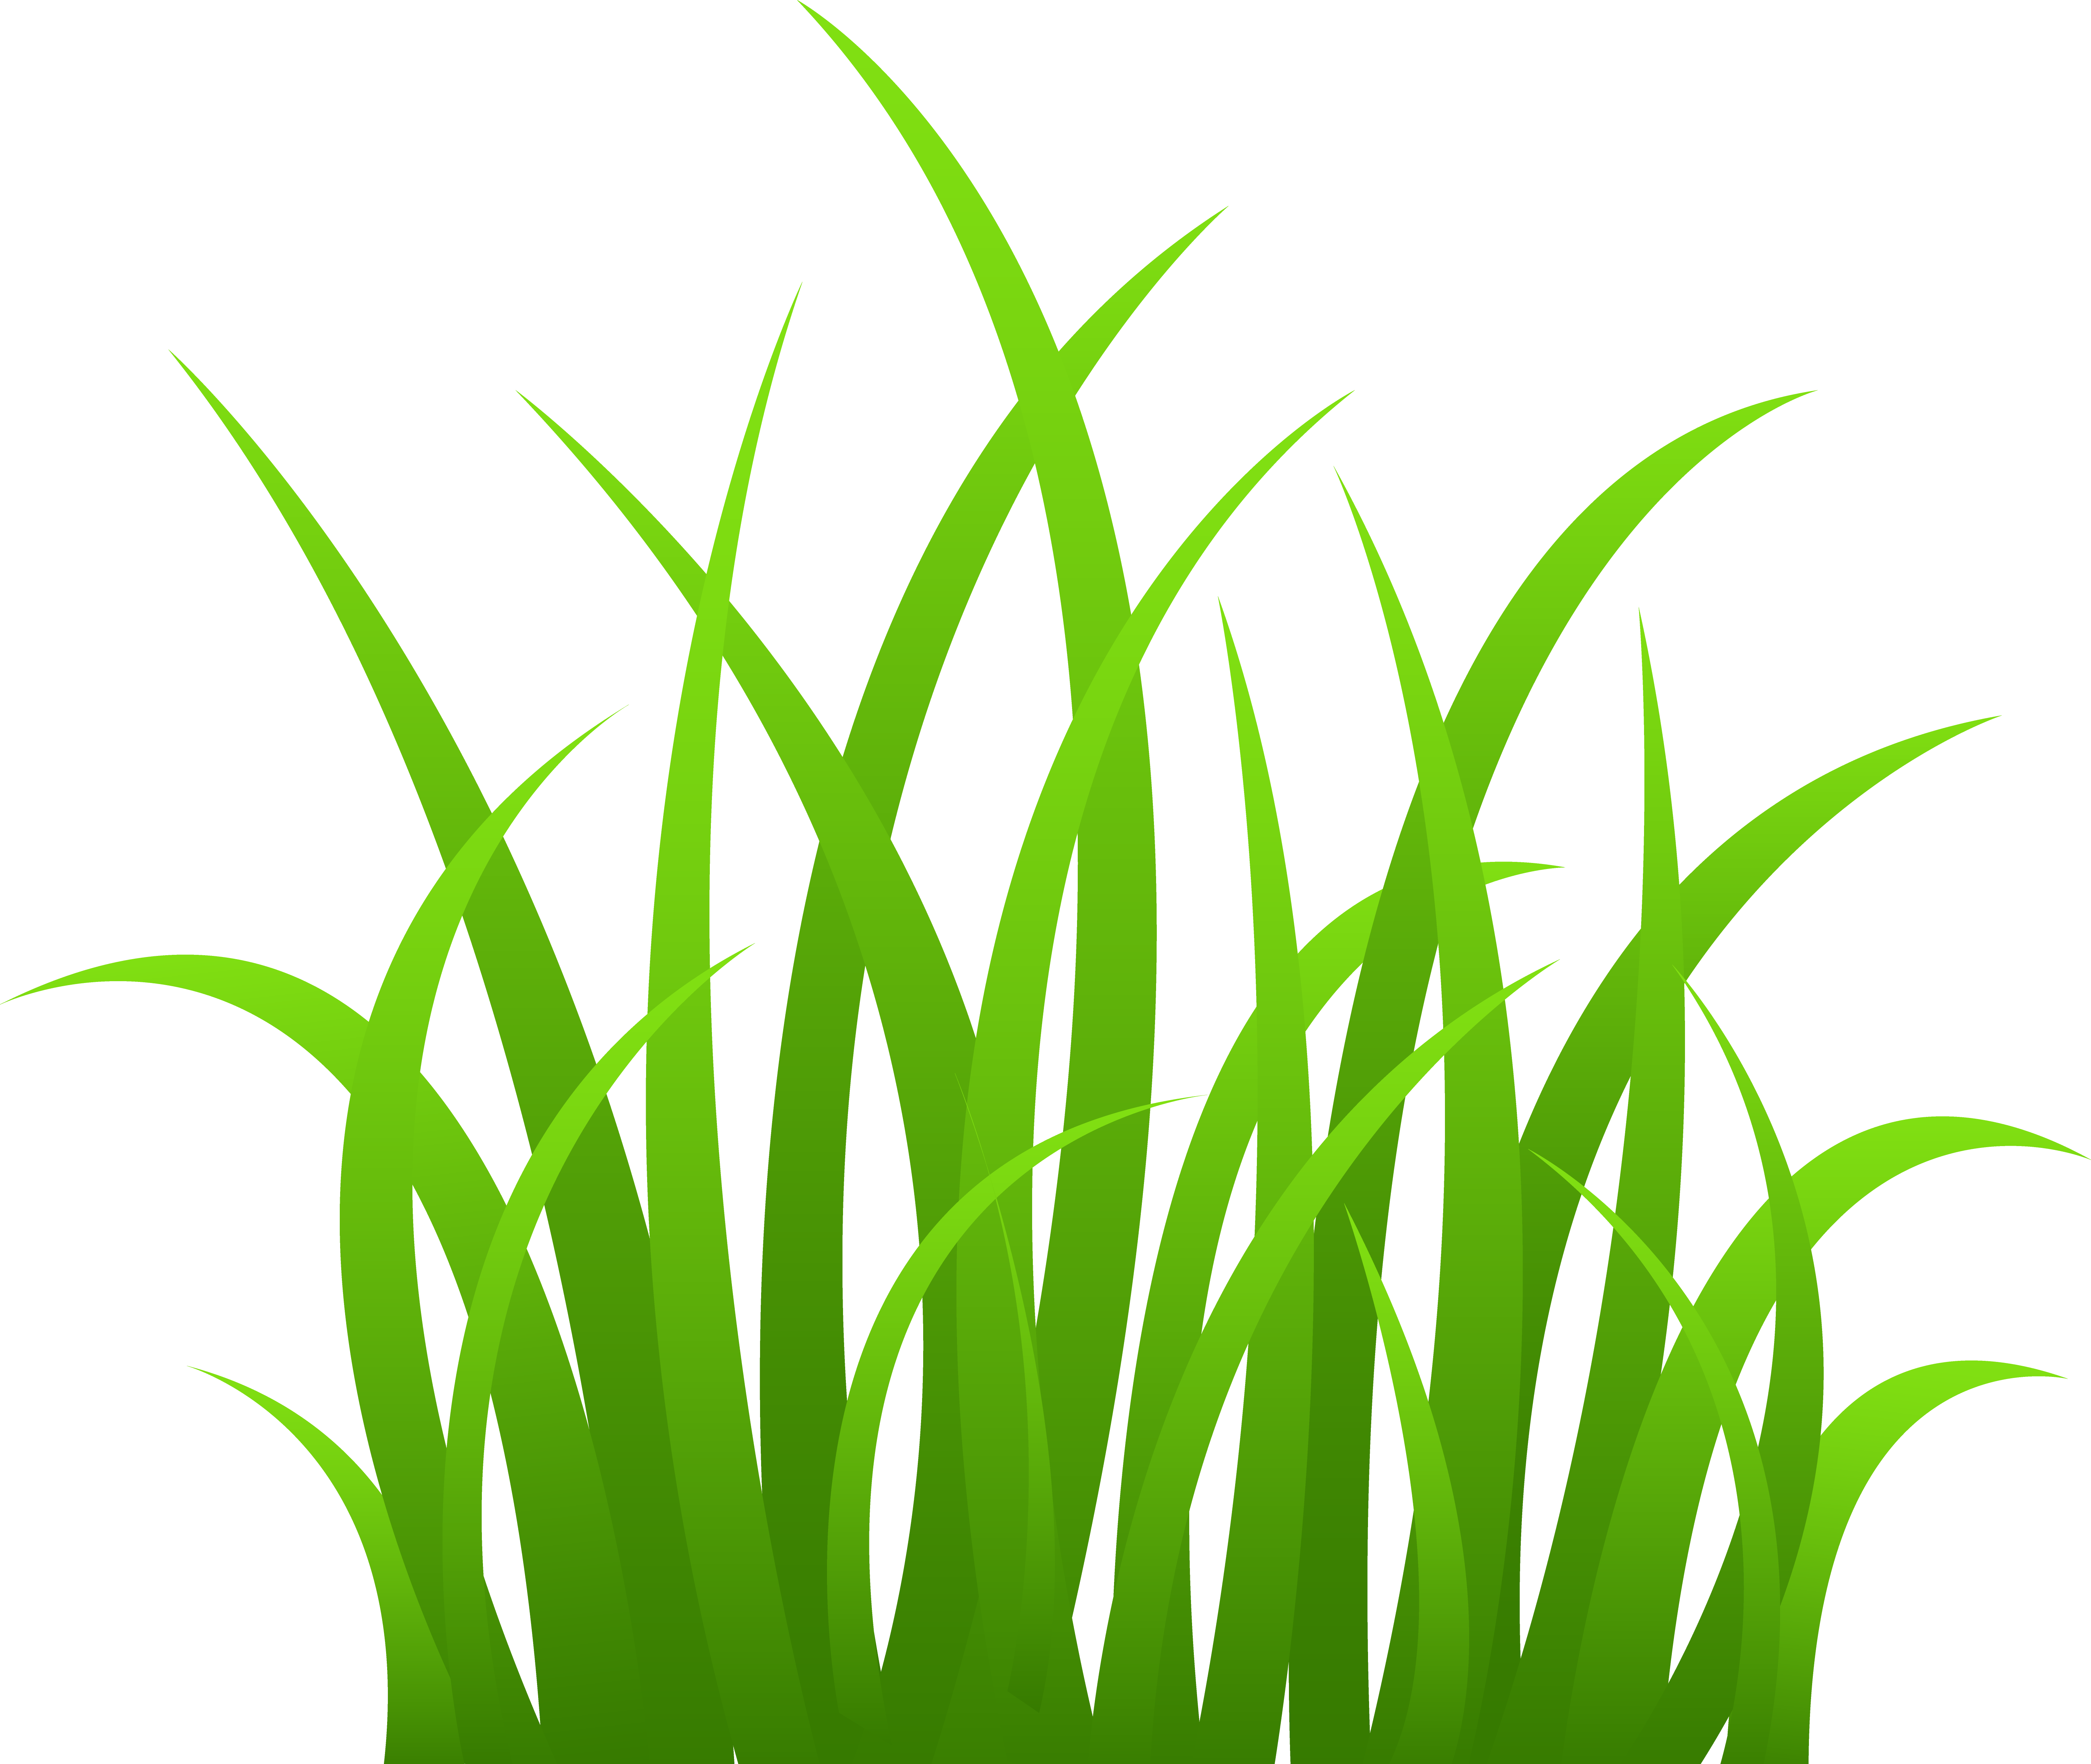 Grass clip art to download clipartcow - Cliparting.com